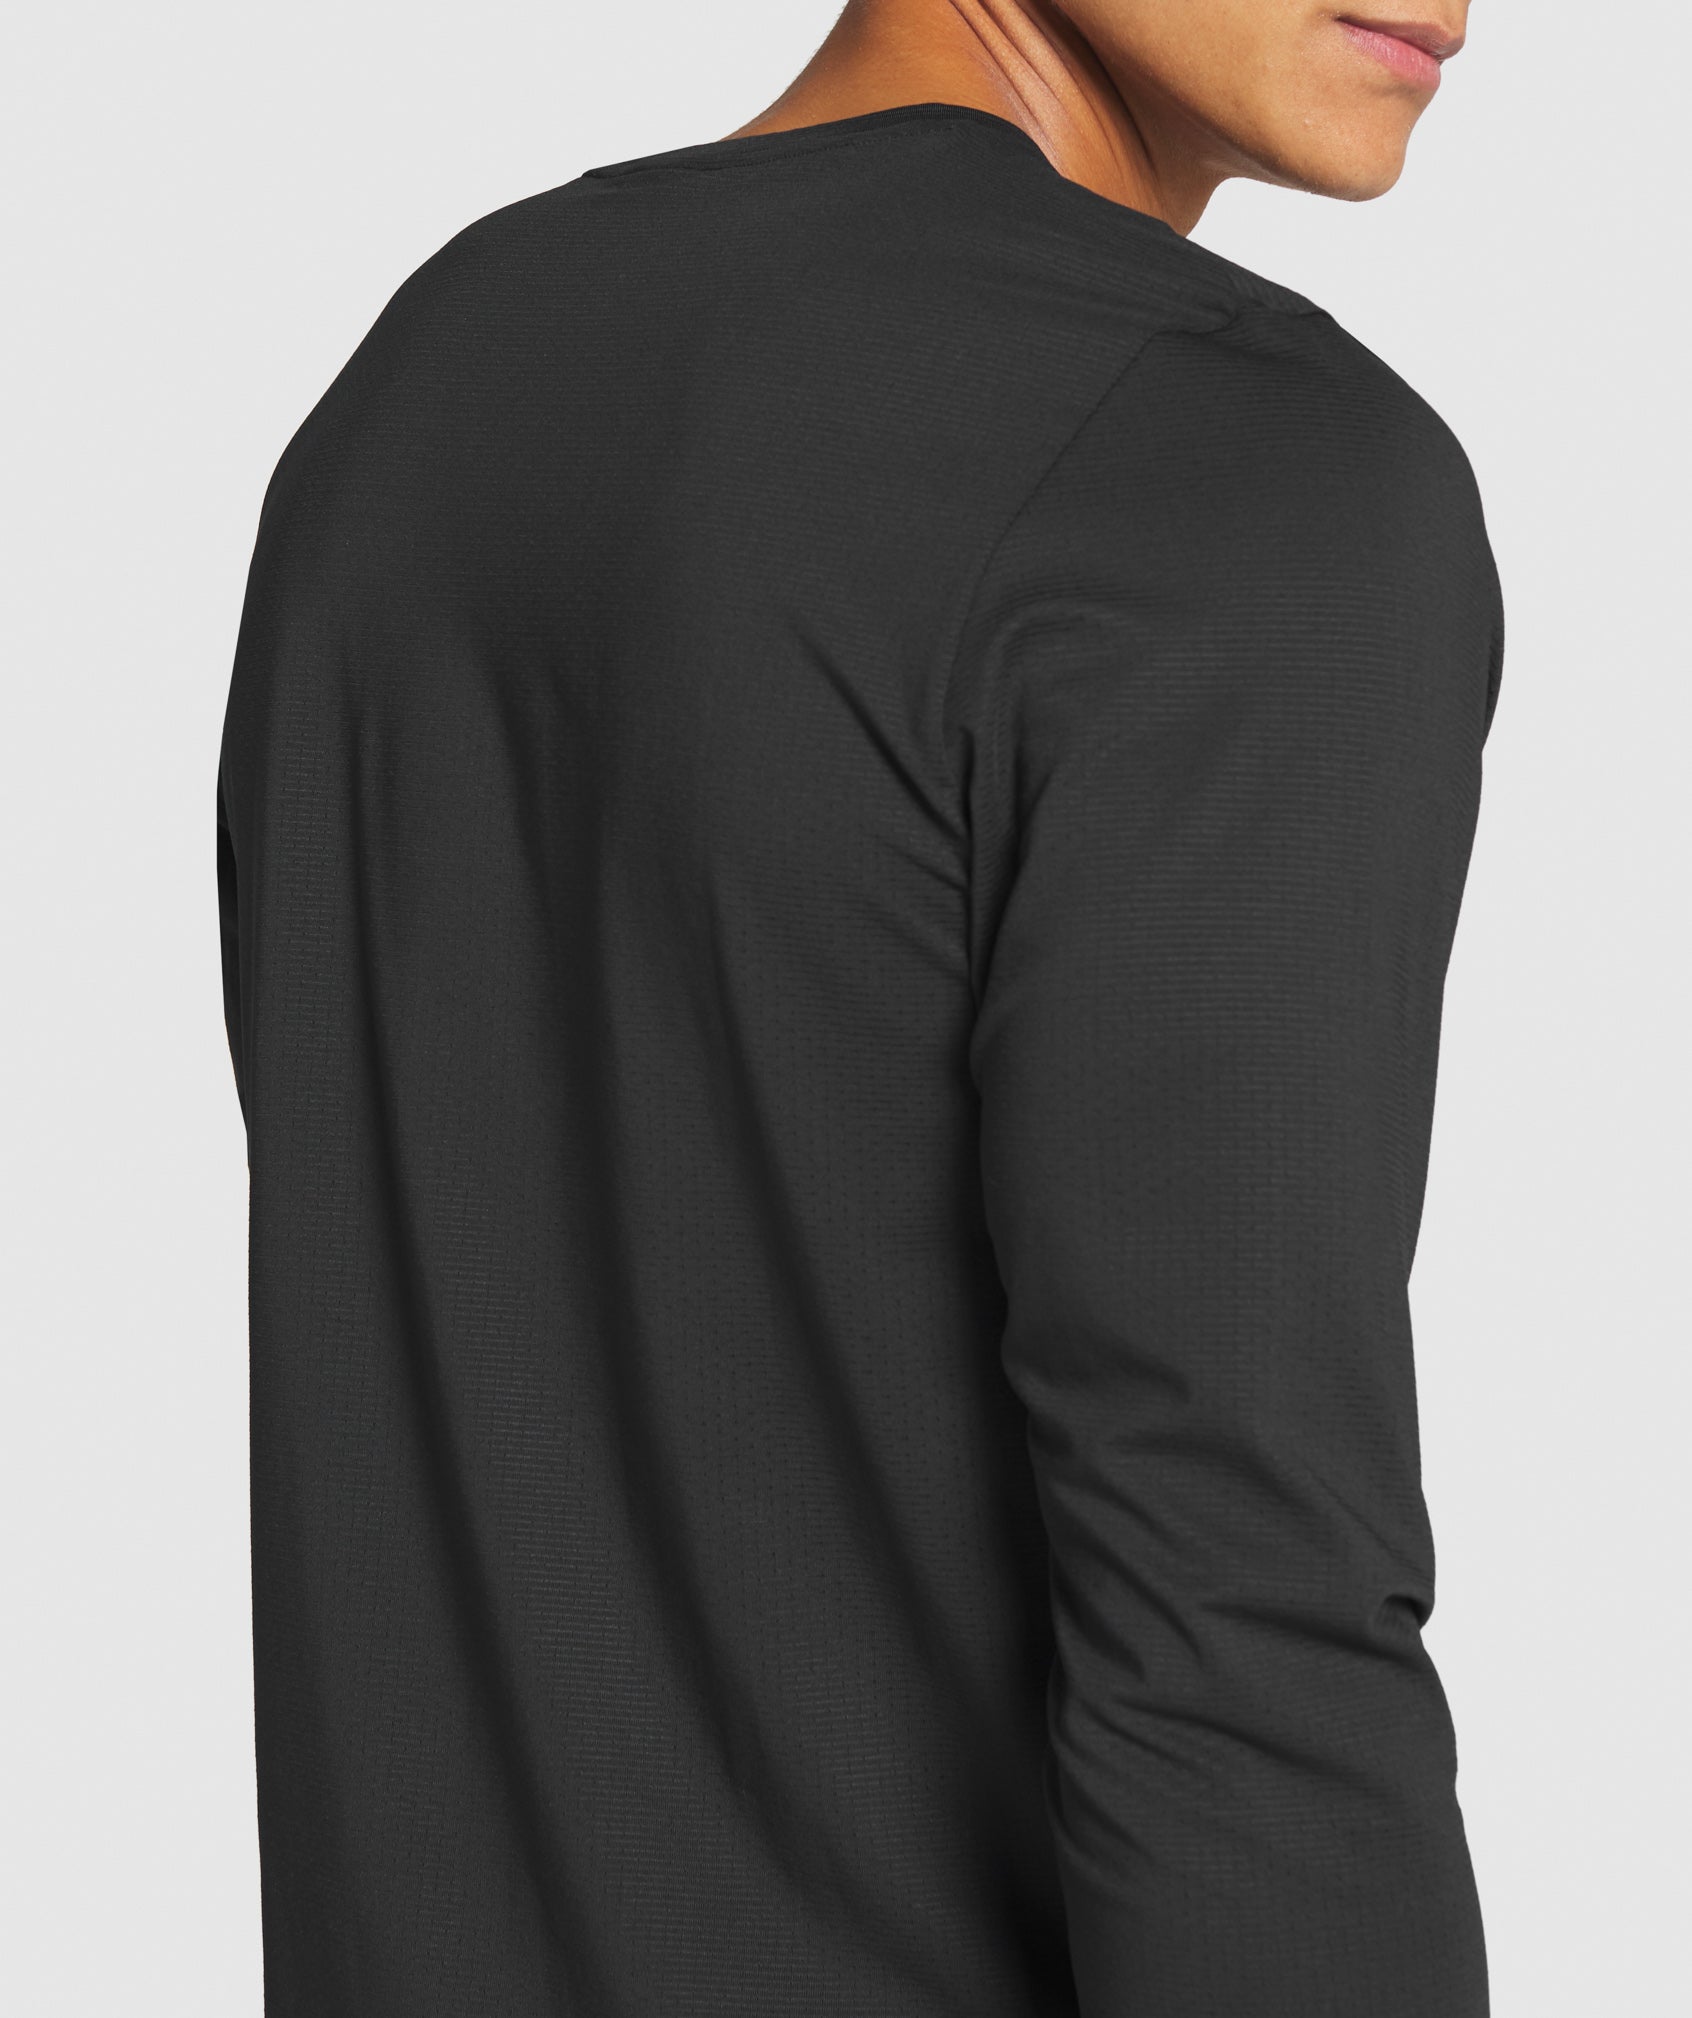 Arrival Long Sleeve T-Shirt in Black - view 6